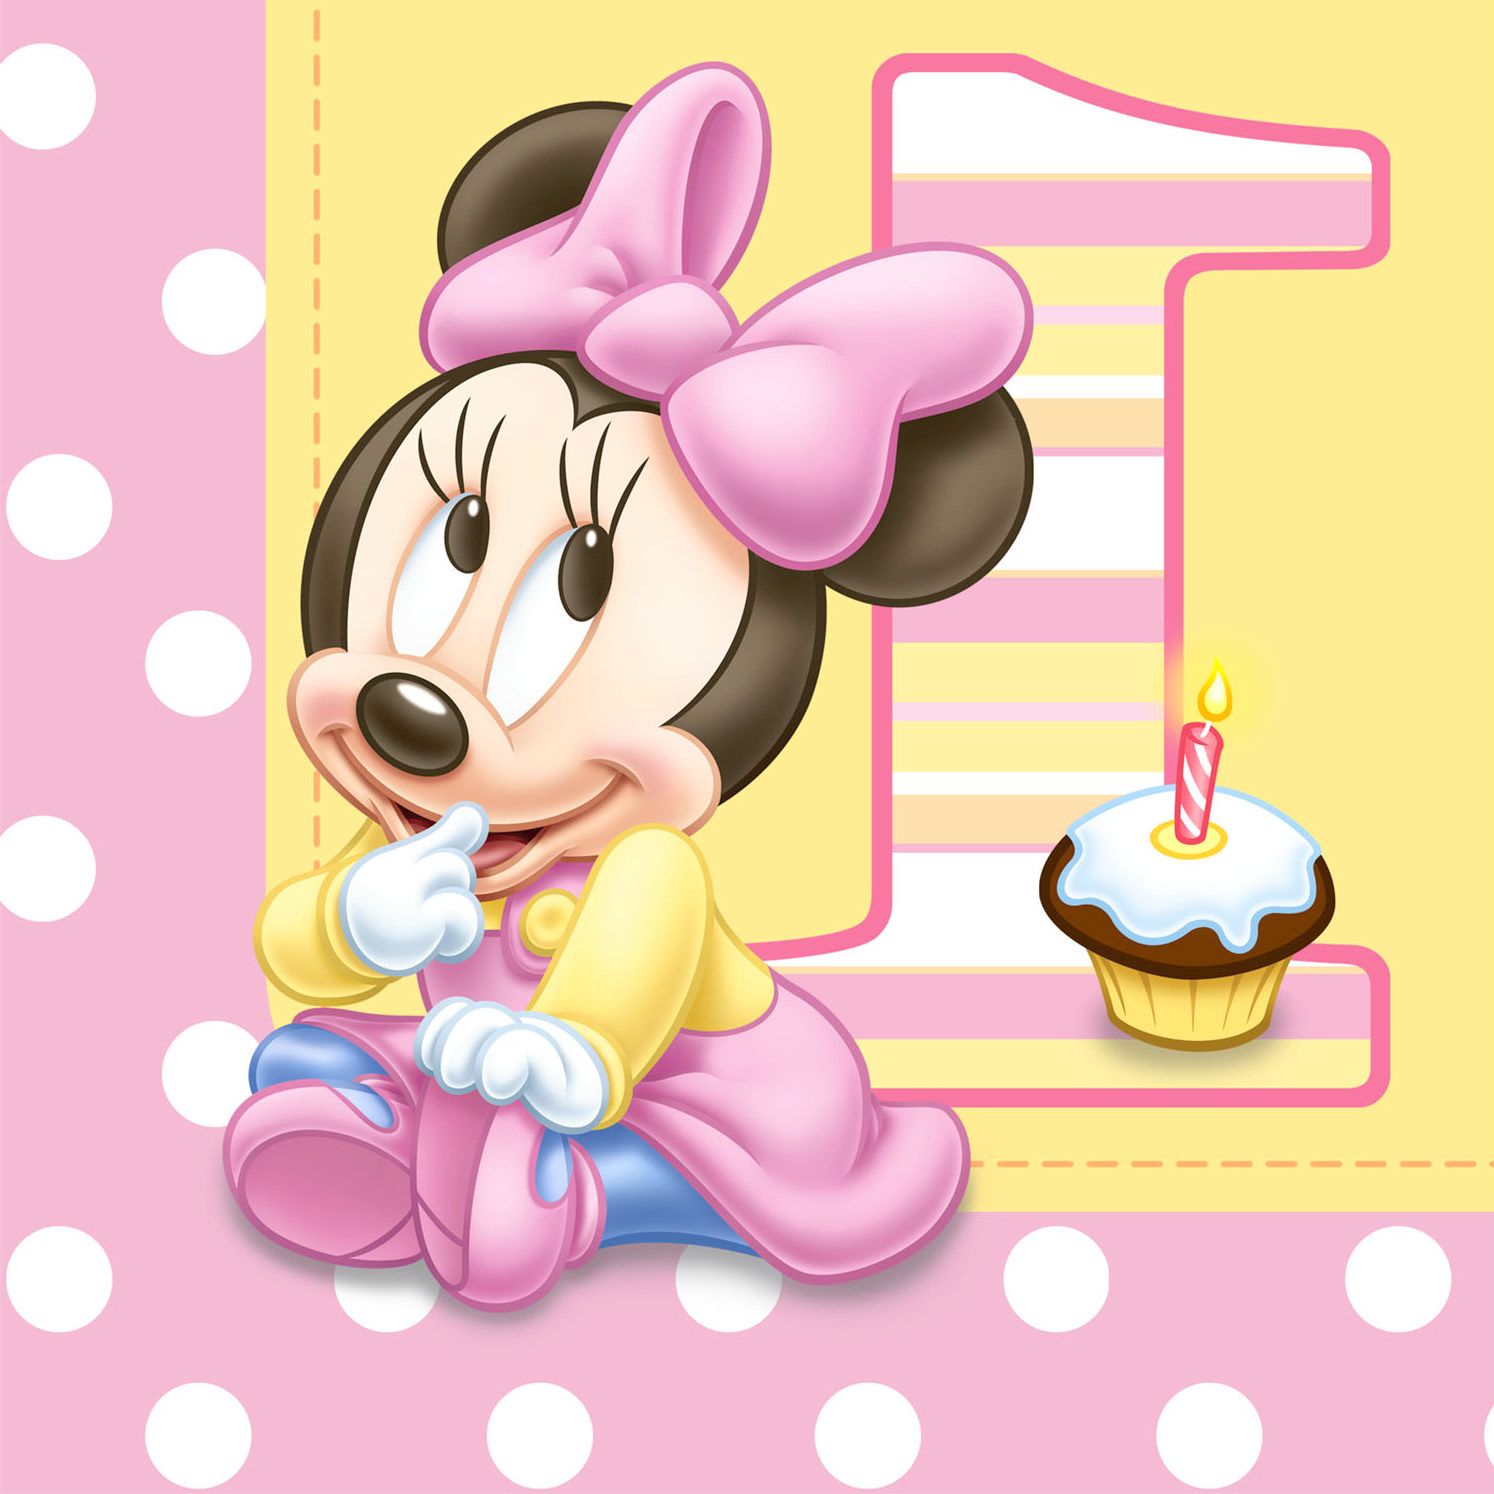 Baby Minnie Mouse Wallpaper Baby Minnie Mouse 1 1494x1494 Wallpaper Teahub Io